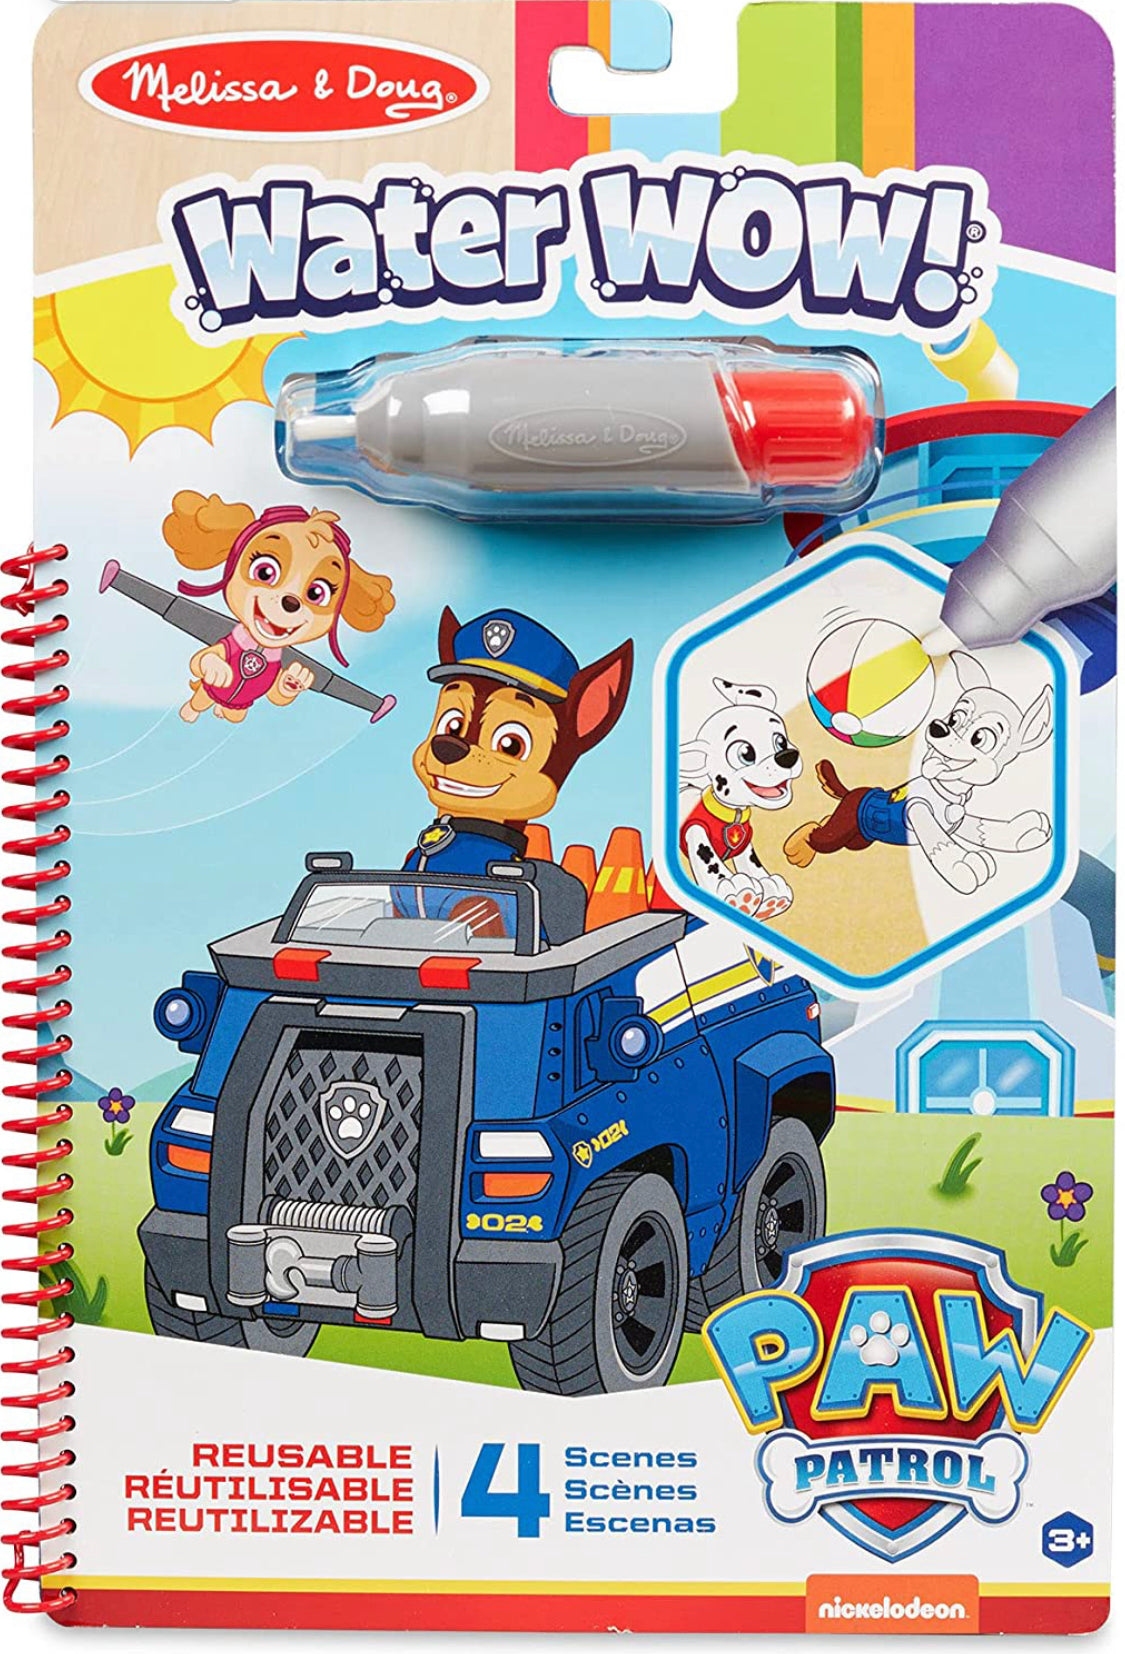 Paw Patrol Water Wow! Colouring book